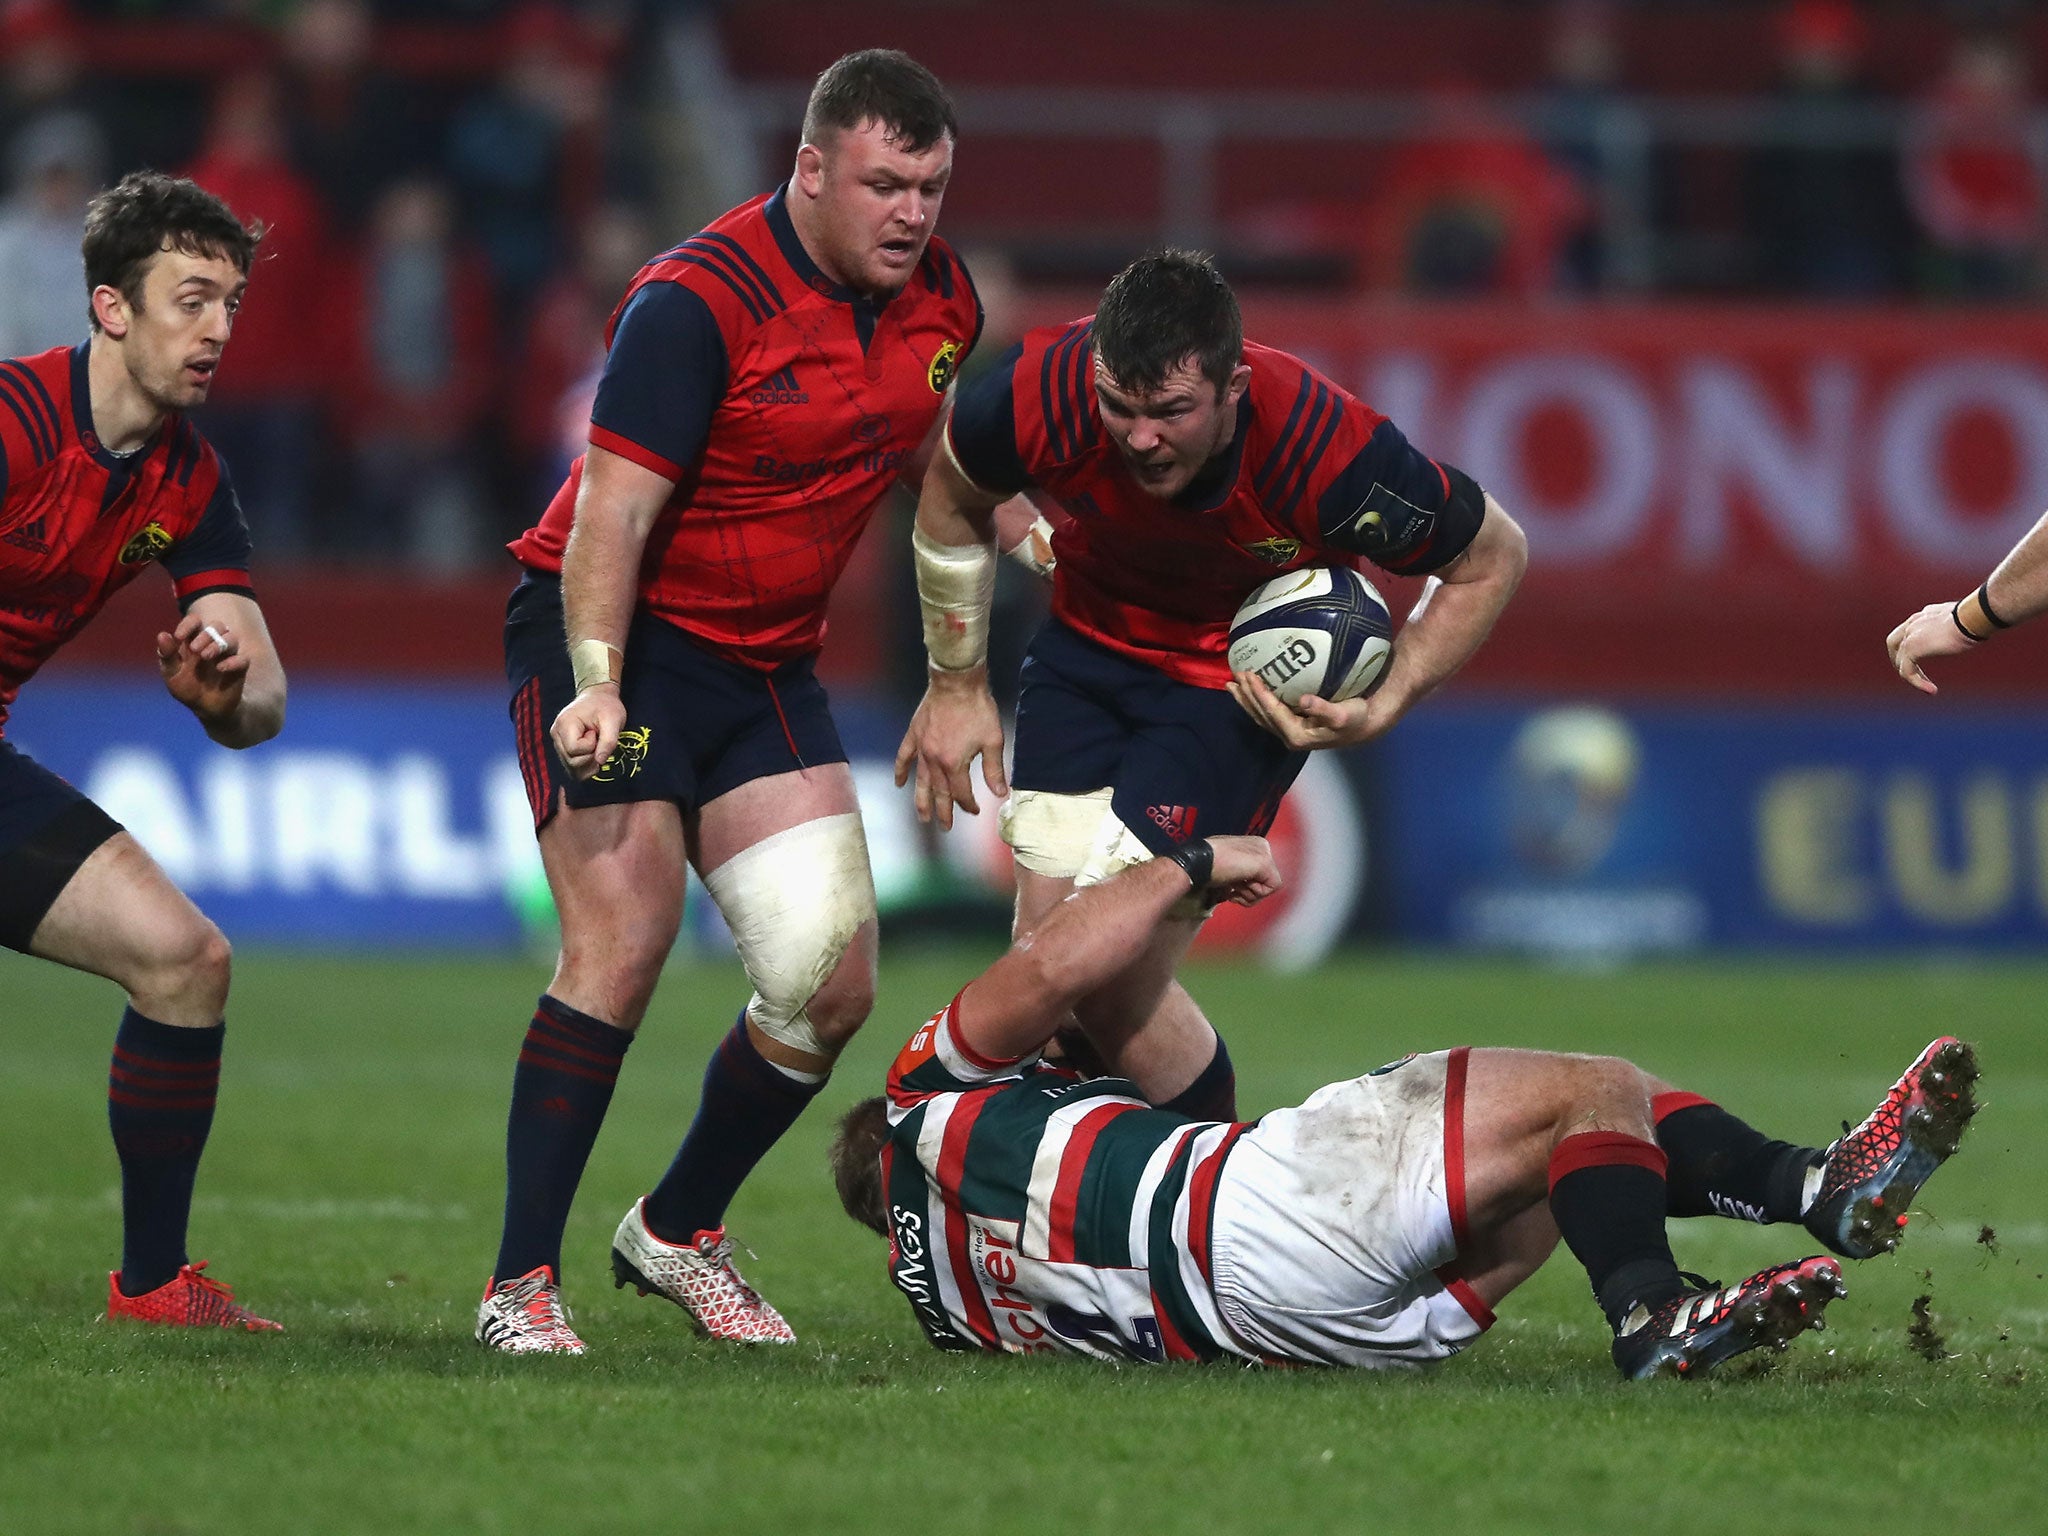 Peter O'Mahony can back-up his dominant showing in the final round of the Six Nations